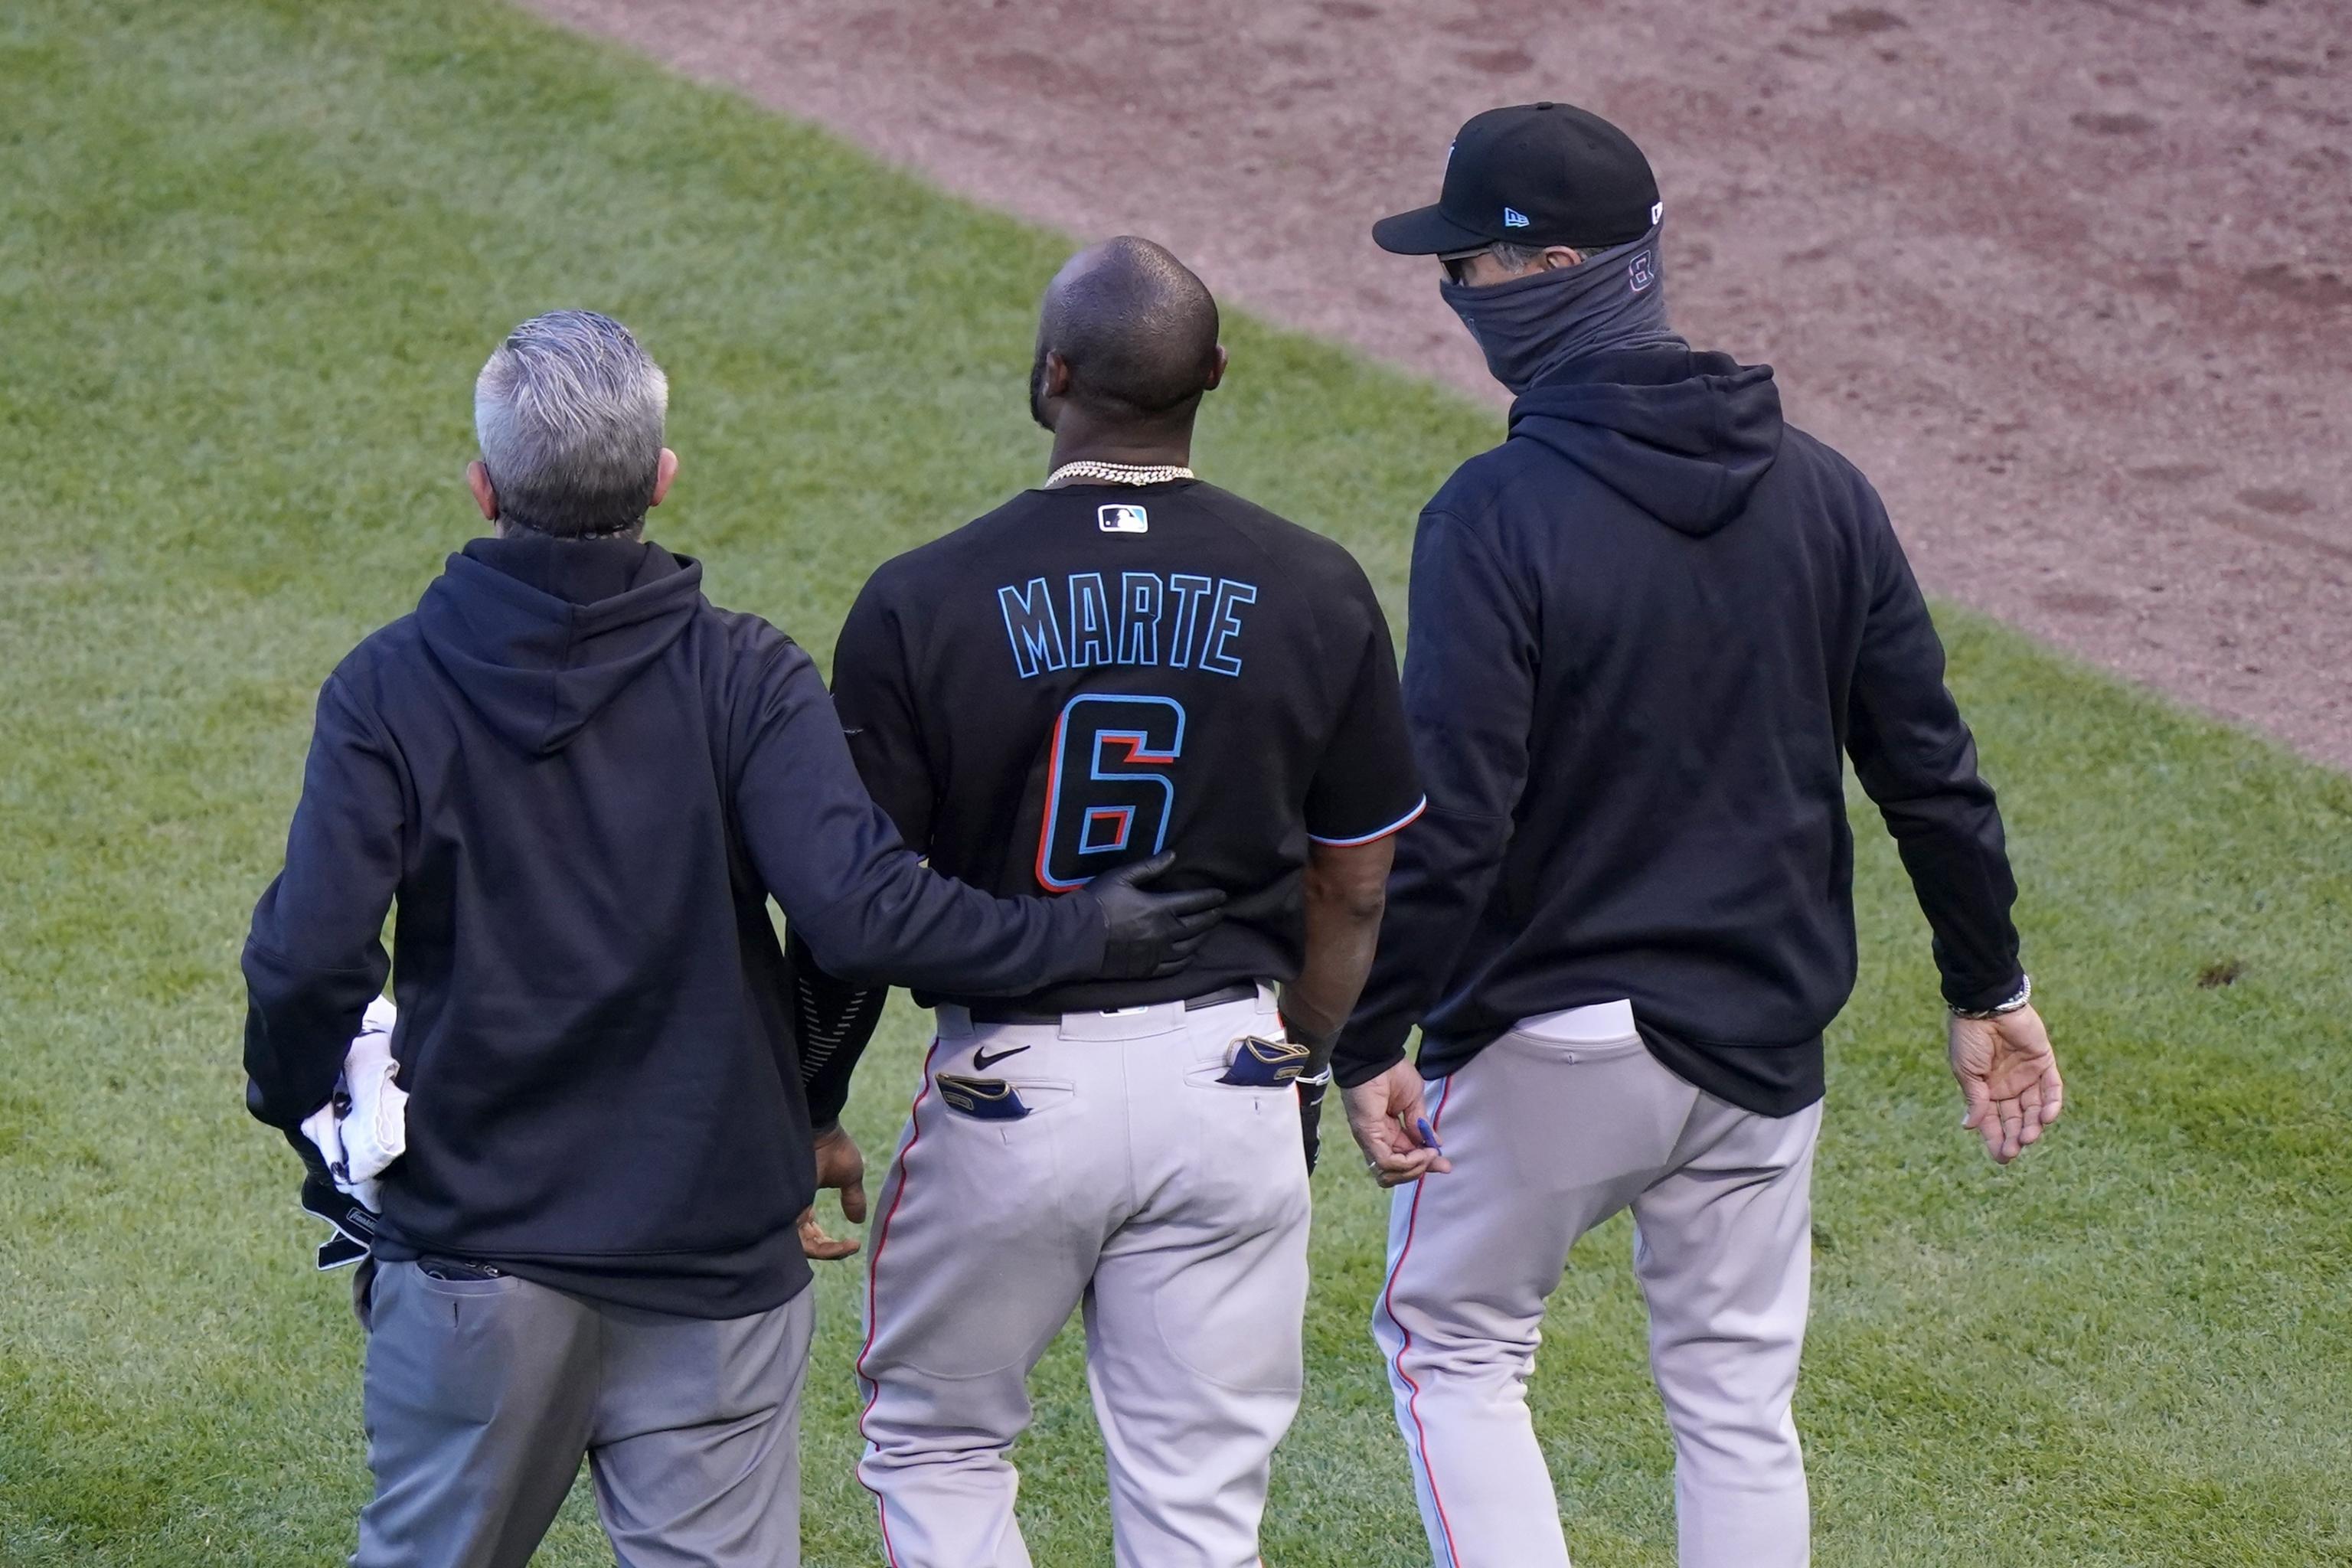 Report: Marlins' Starling Marte Diagnosed with Broken Hand After